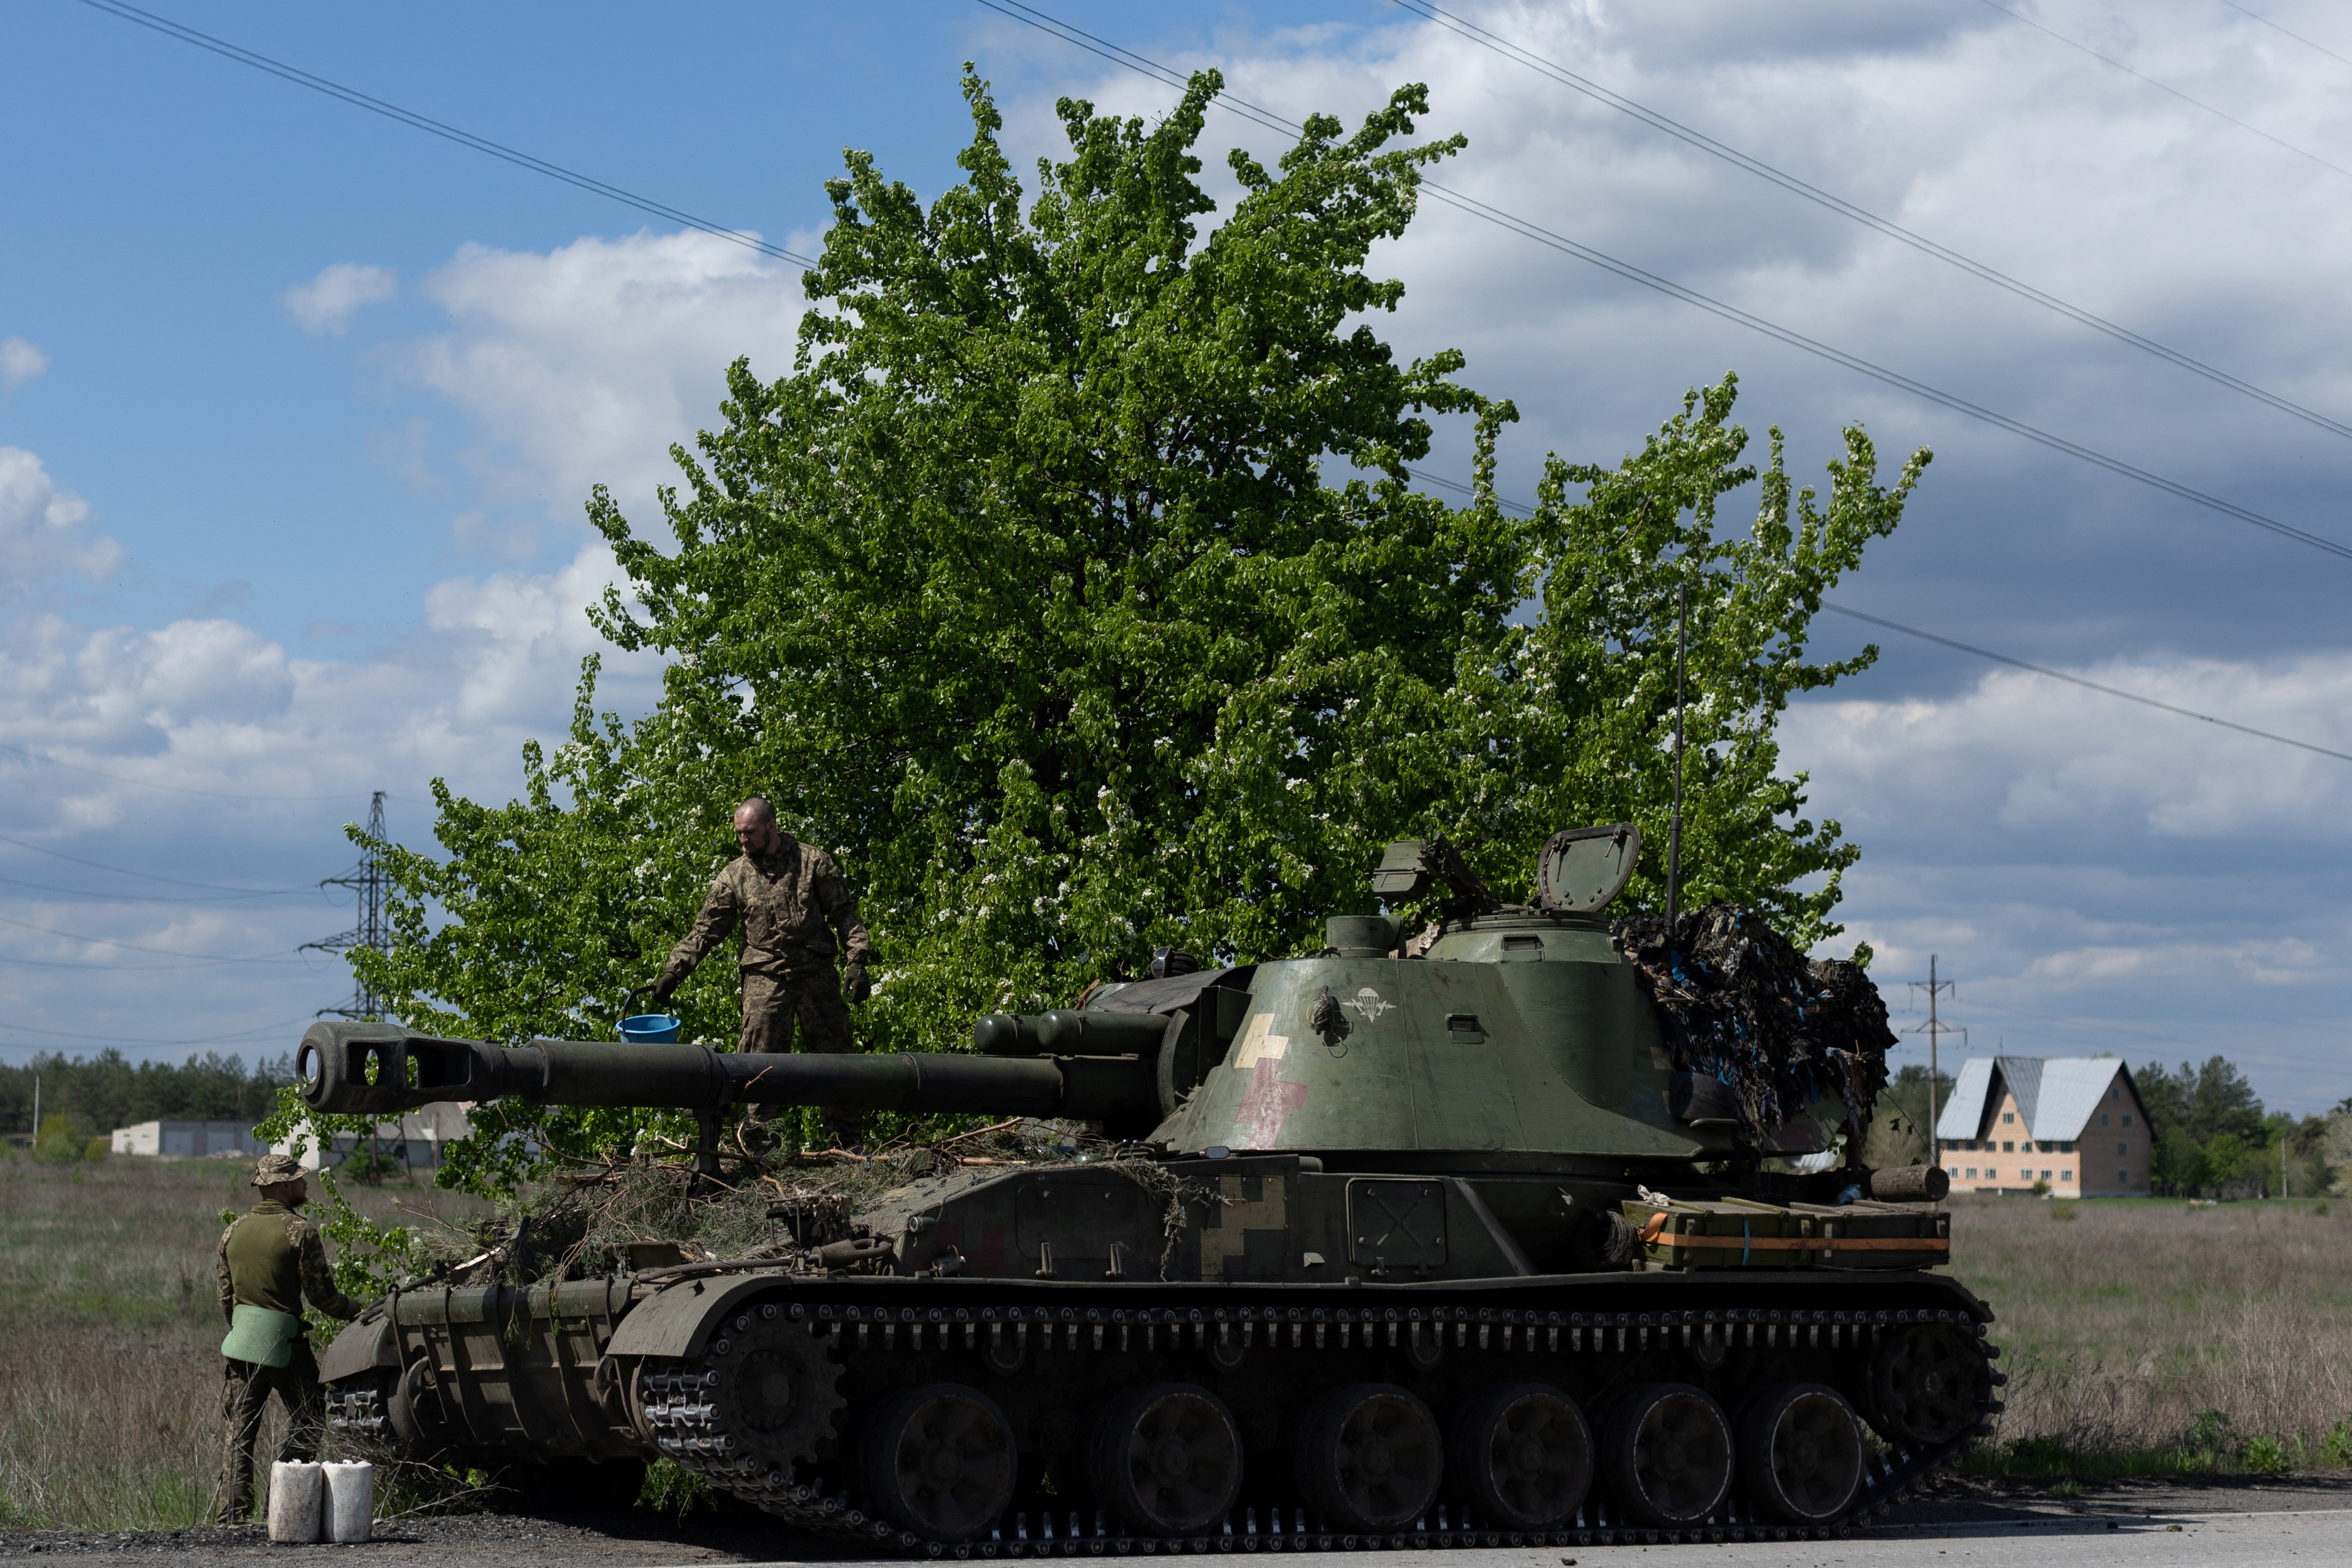 Ukrainian soldiers stand on the top of a tank, amid Russia's invasion of Ukraine, in the frontline city of Lyman, Donetsk region